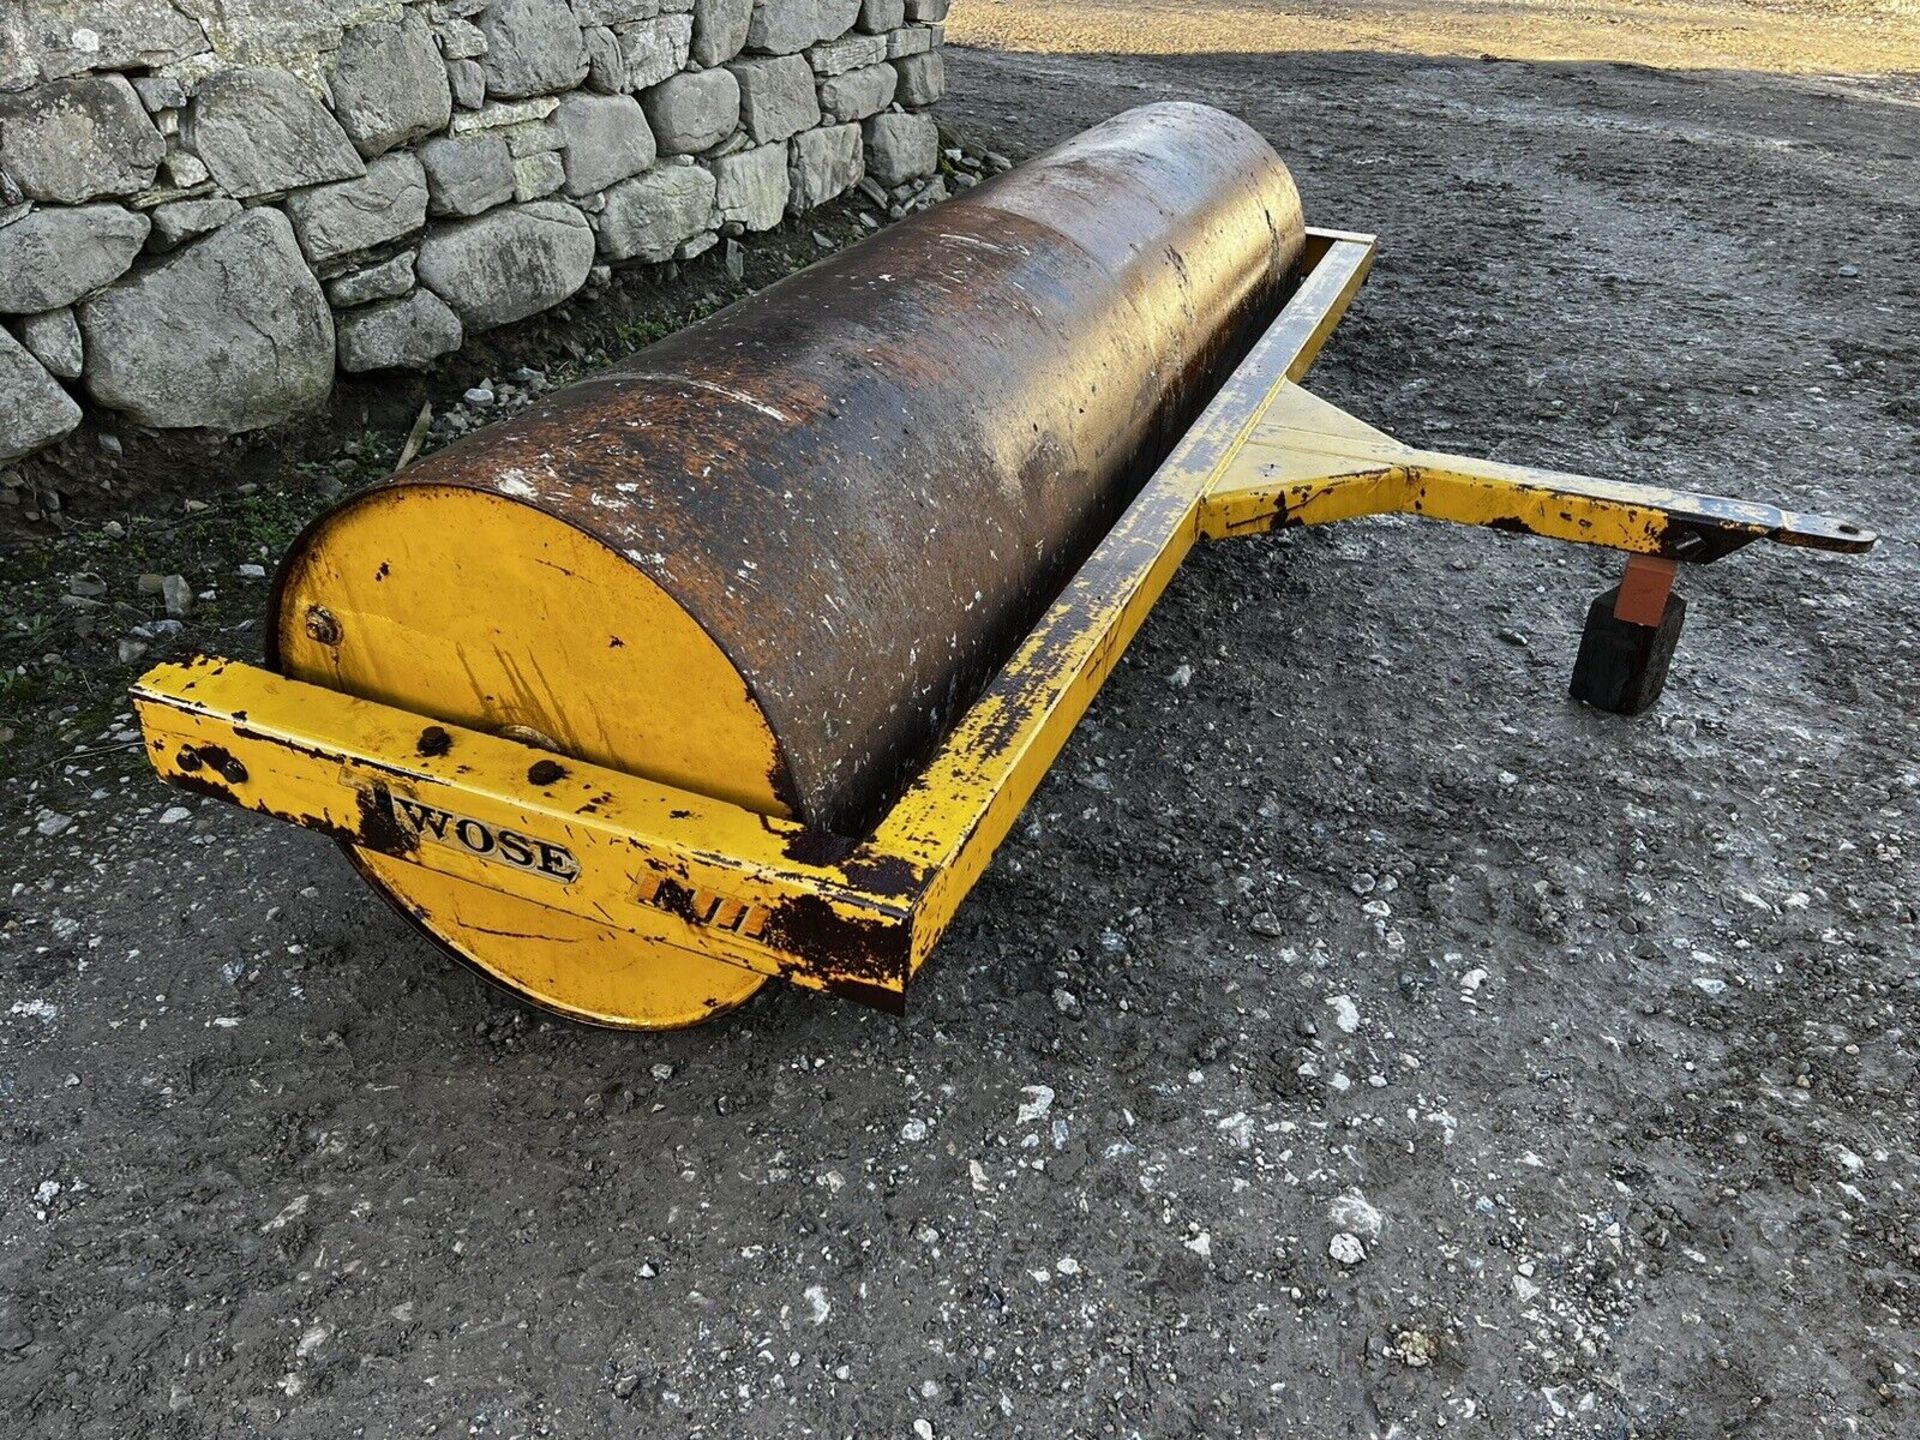 TWOSE 10 FT BALLAST ROLLER - Image 2 of 4